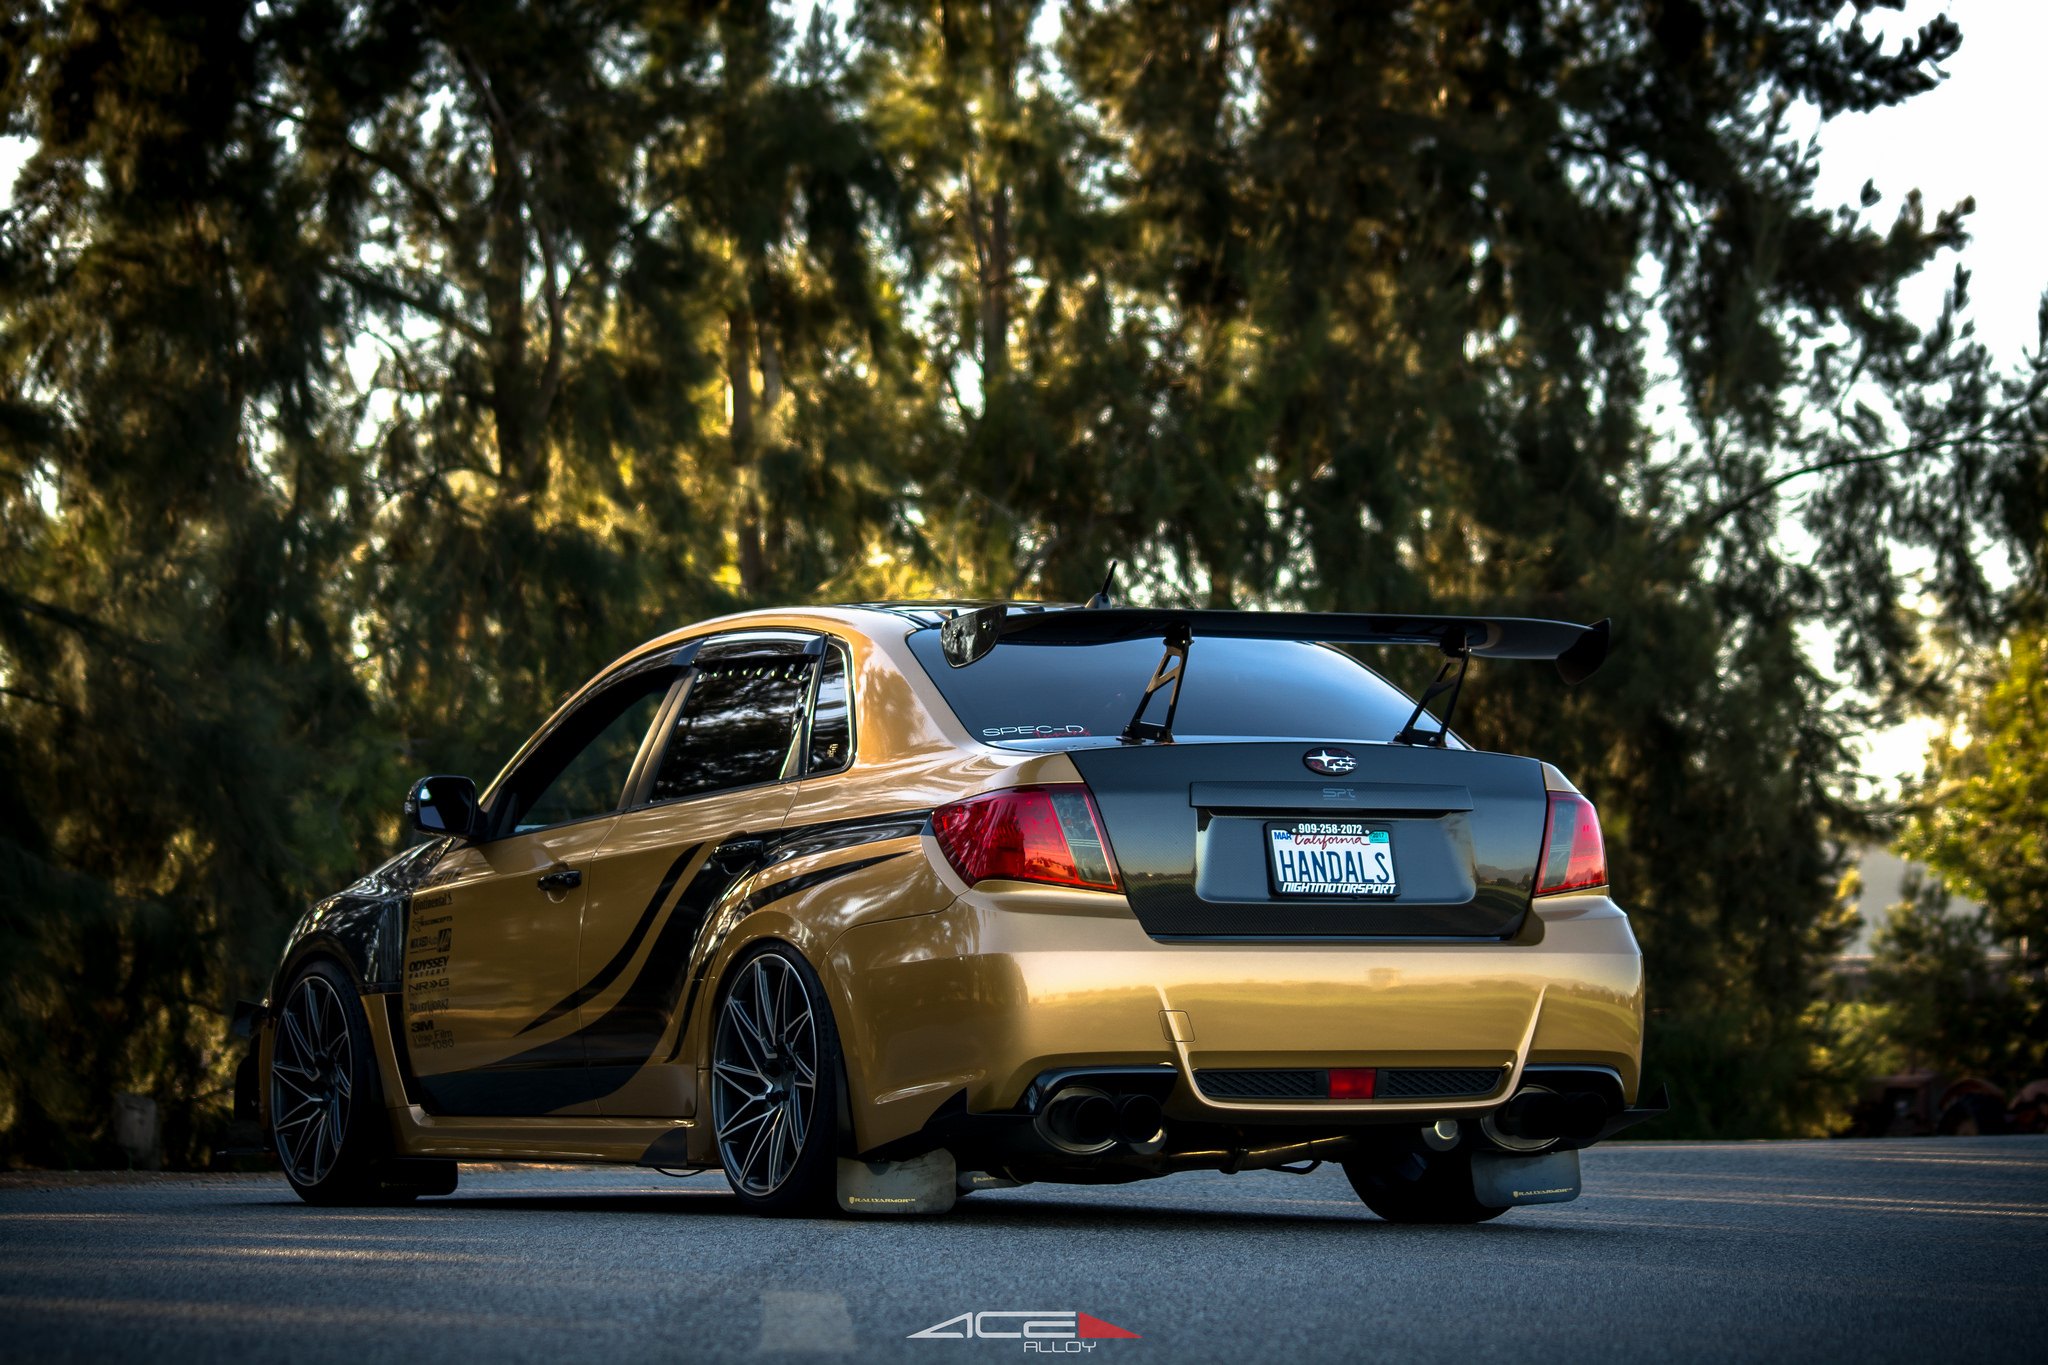 Large Wing Spoiler on Custom Gold Subaru WRX - Photo by Ace Alloy